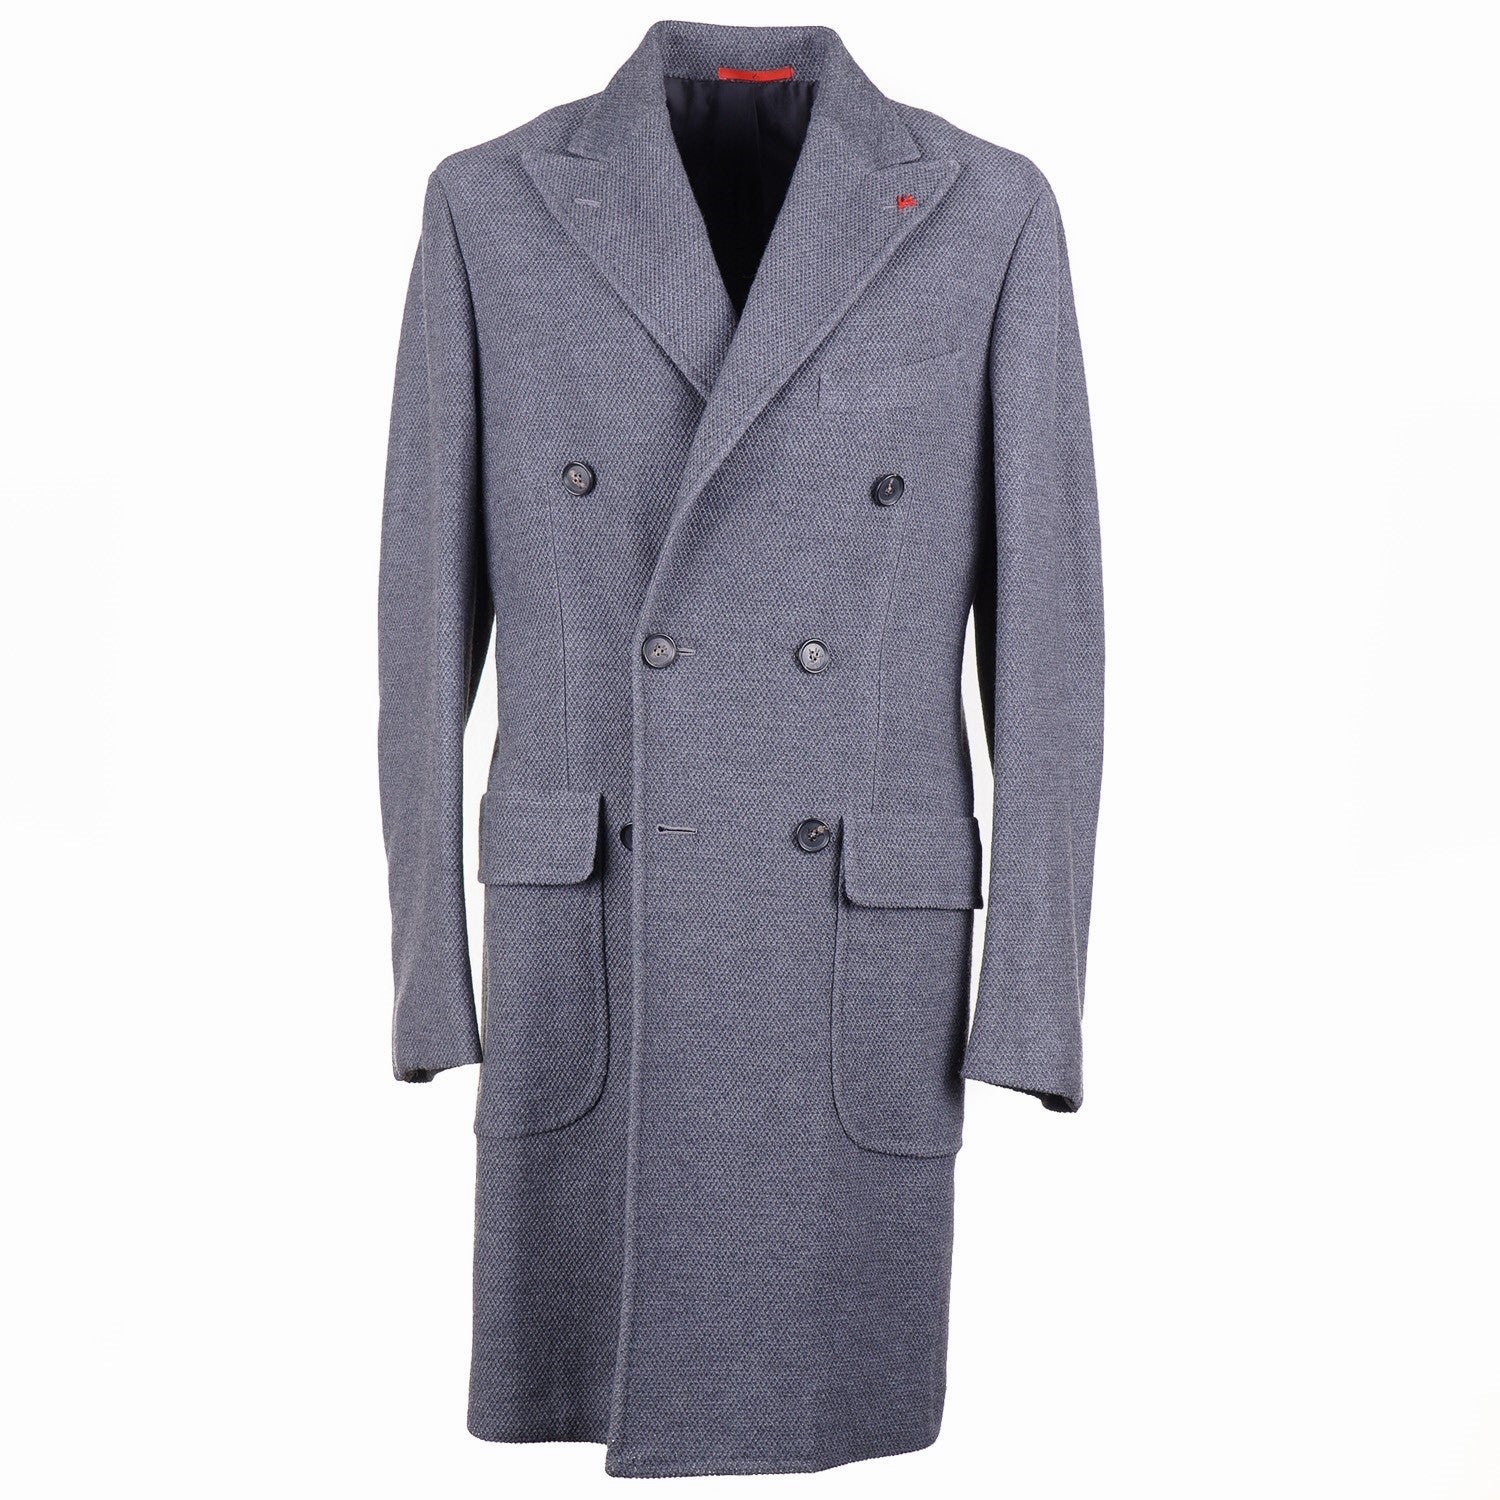 Isaia Patterned Wool Overcoat - Top Shelf Apparel